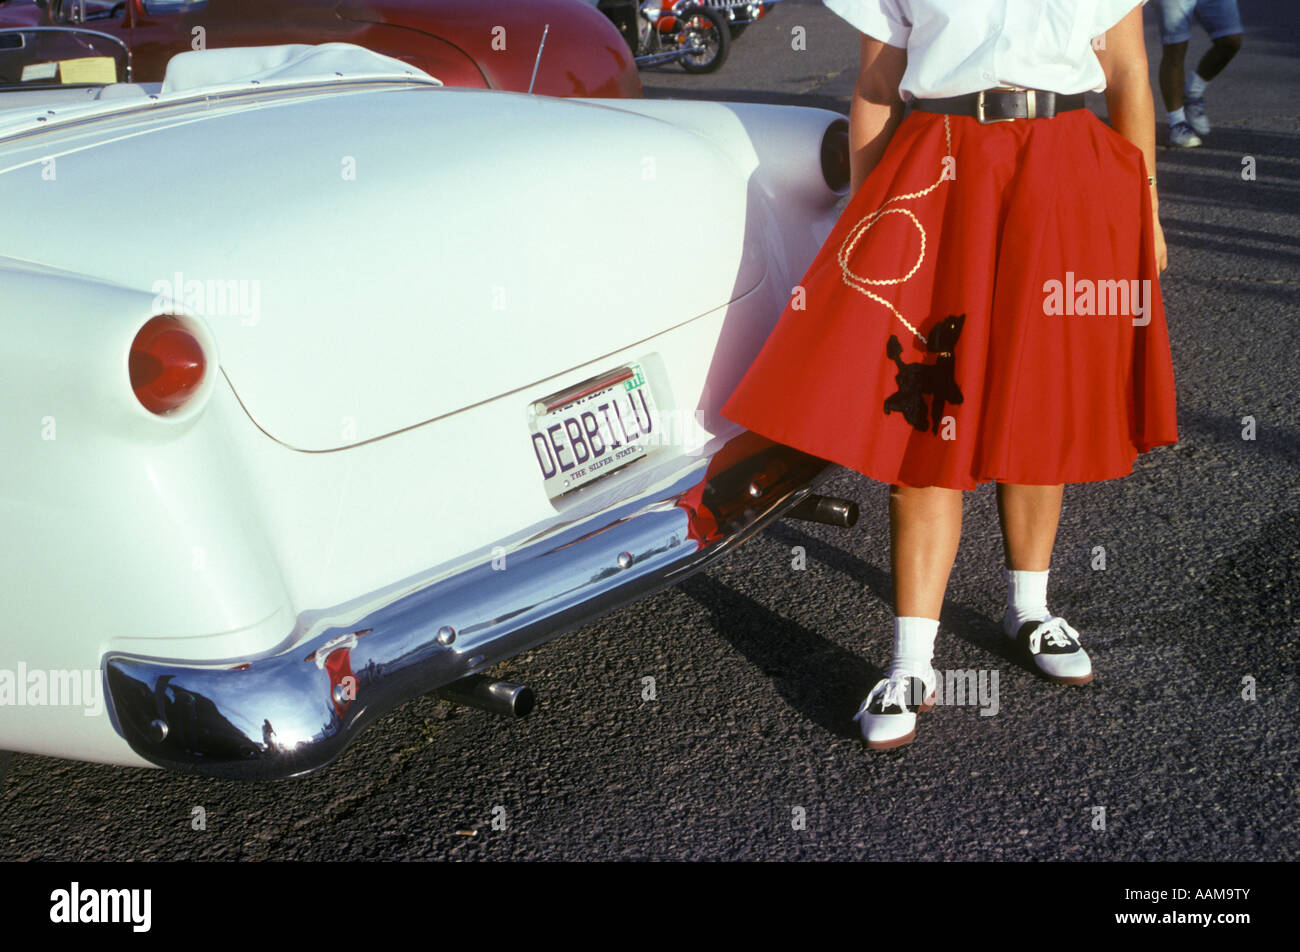 WOMAN IN RED POODLE SKIRT AND SADDLE SHOES NEXT TO WHITE 1950s CAR Stock Photo